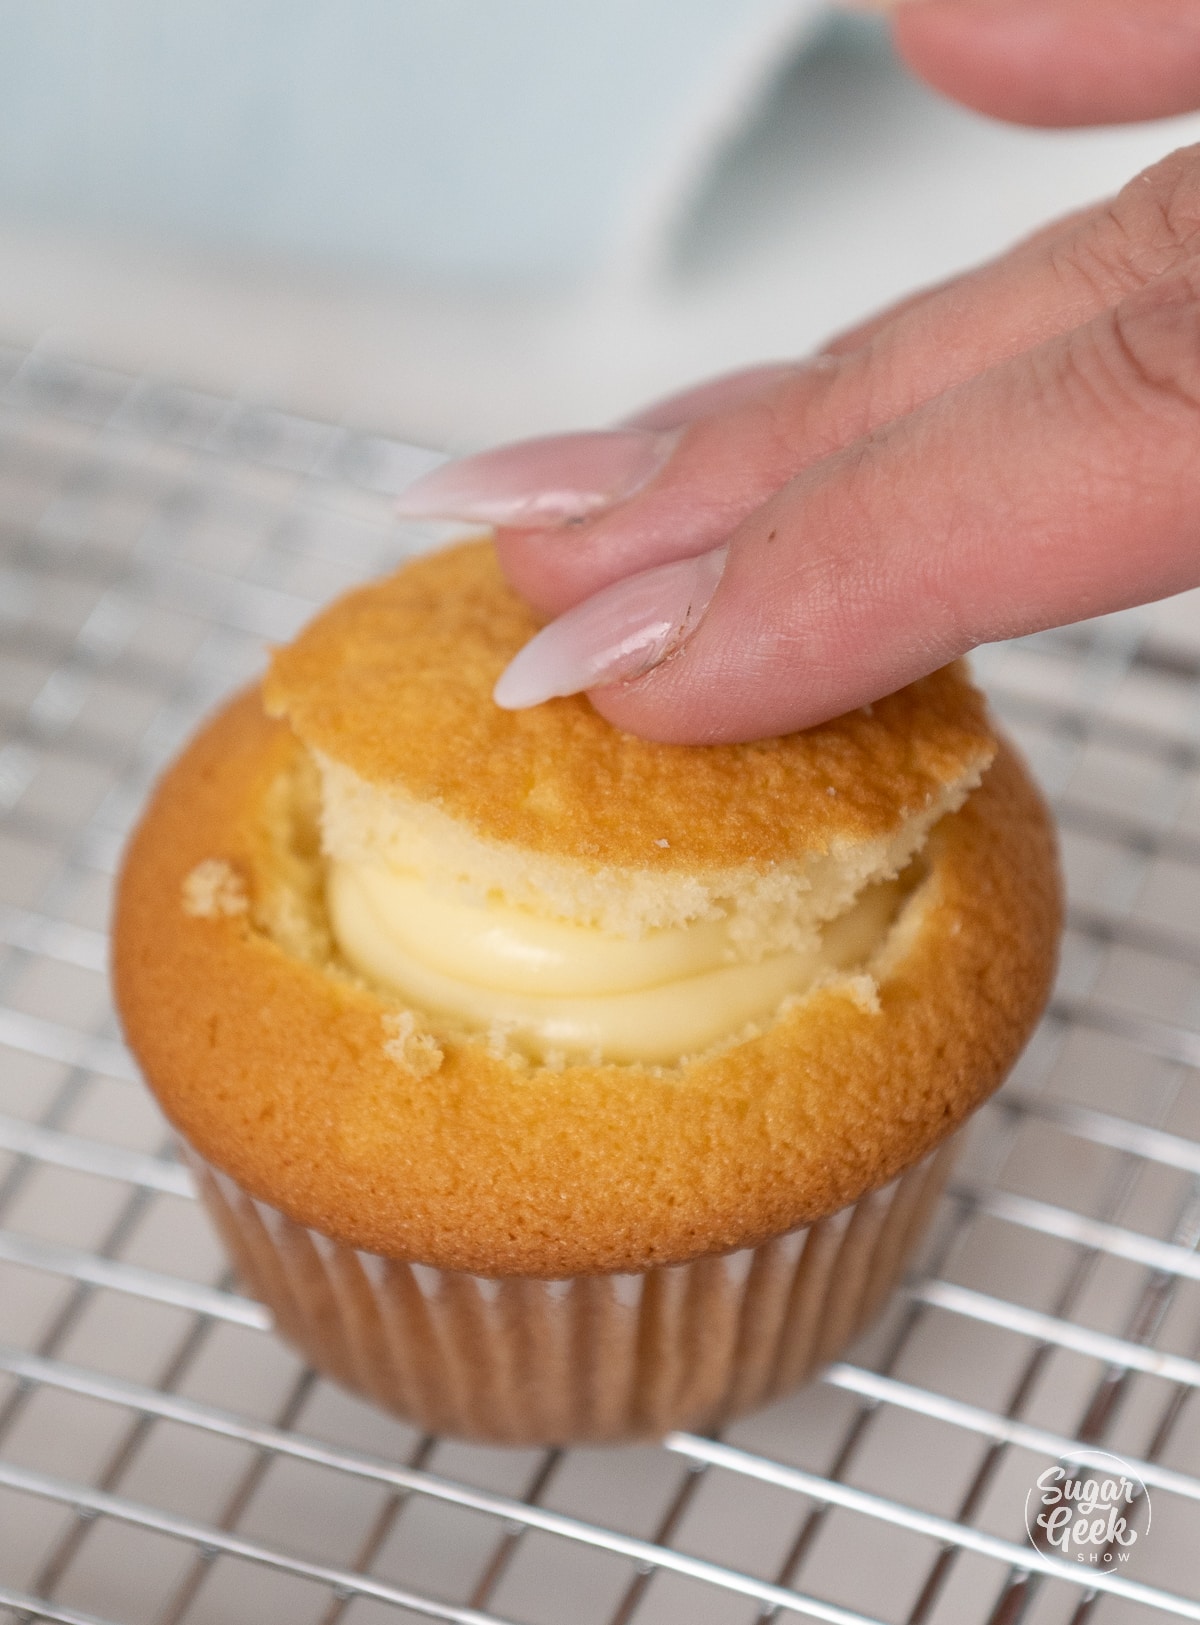 Hand placing top back on filled yellow cupcake.